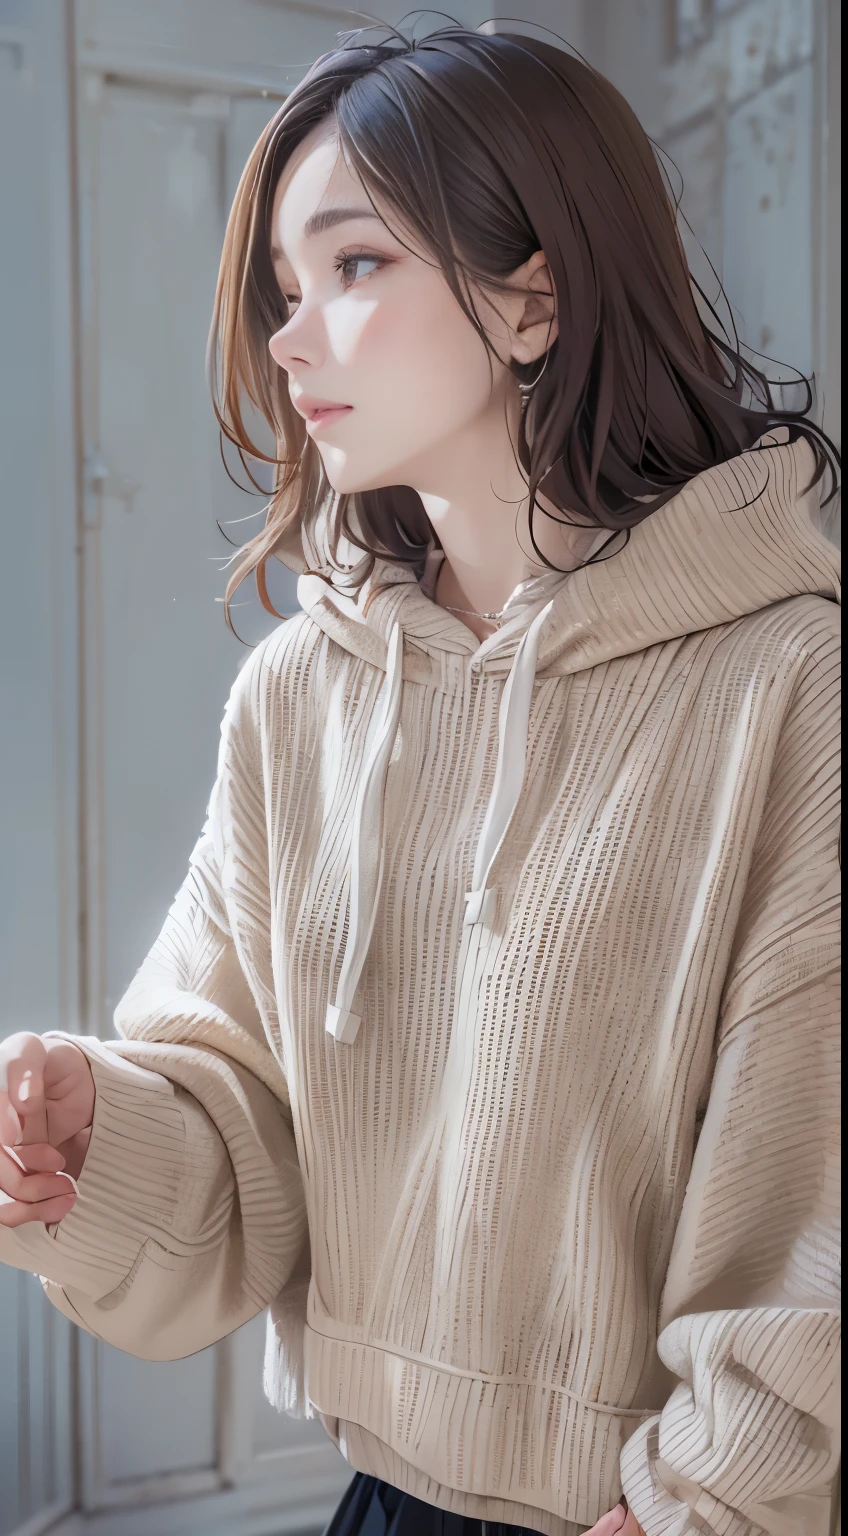 one girls、cute  face、parfect anatomy、knit hoodie、Clothing in calm colors、long  skirt、Longhaire、Hairpin、top-quality、Ultra-detail、masuter piece、８ｋ、50ｍｍlens、Professional Photographer